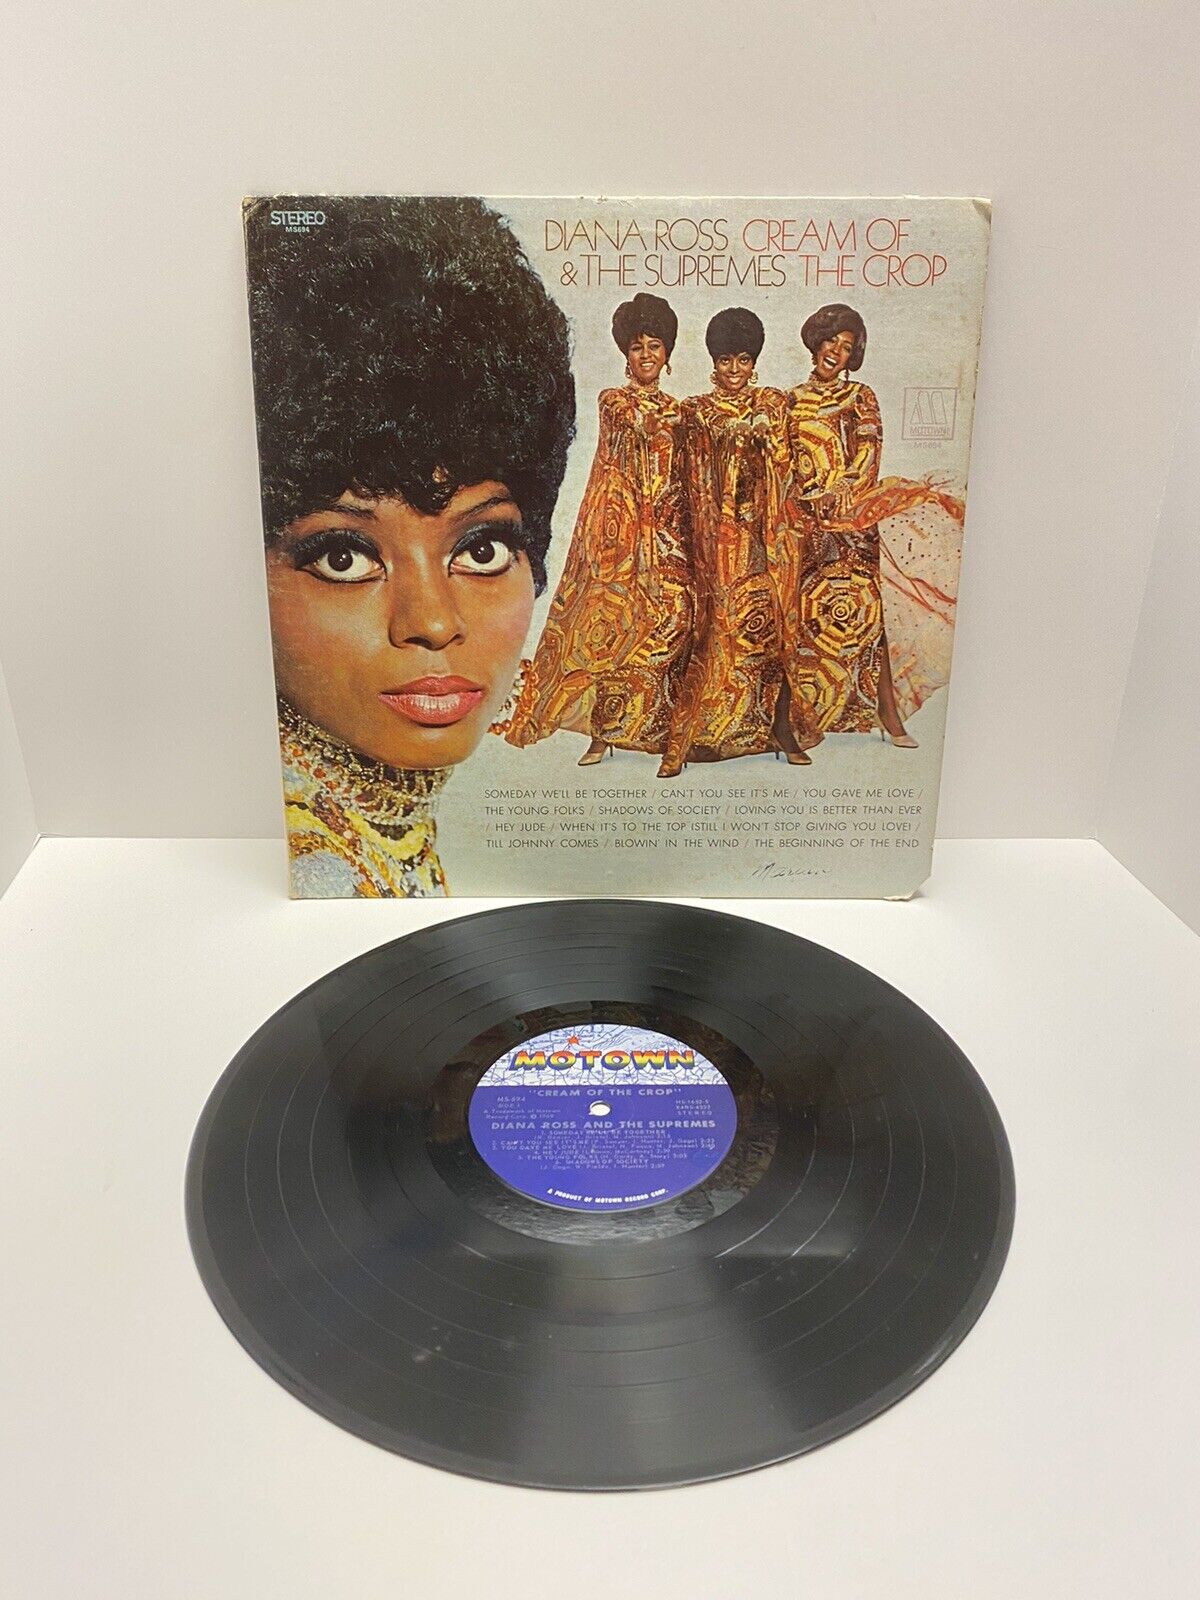 DIANA ROSS AND THE SUPREMES CREAM OF THE CROP MOTOWN MS694 STEREO